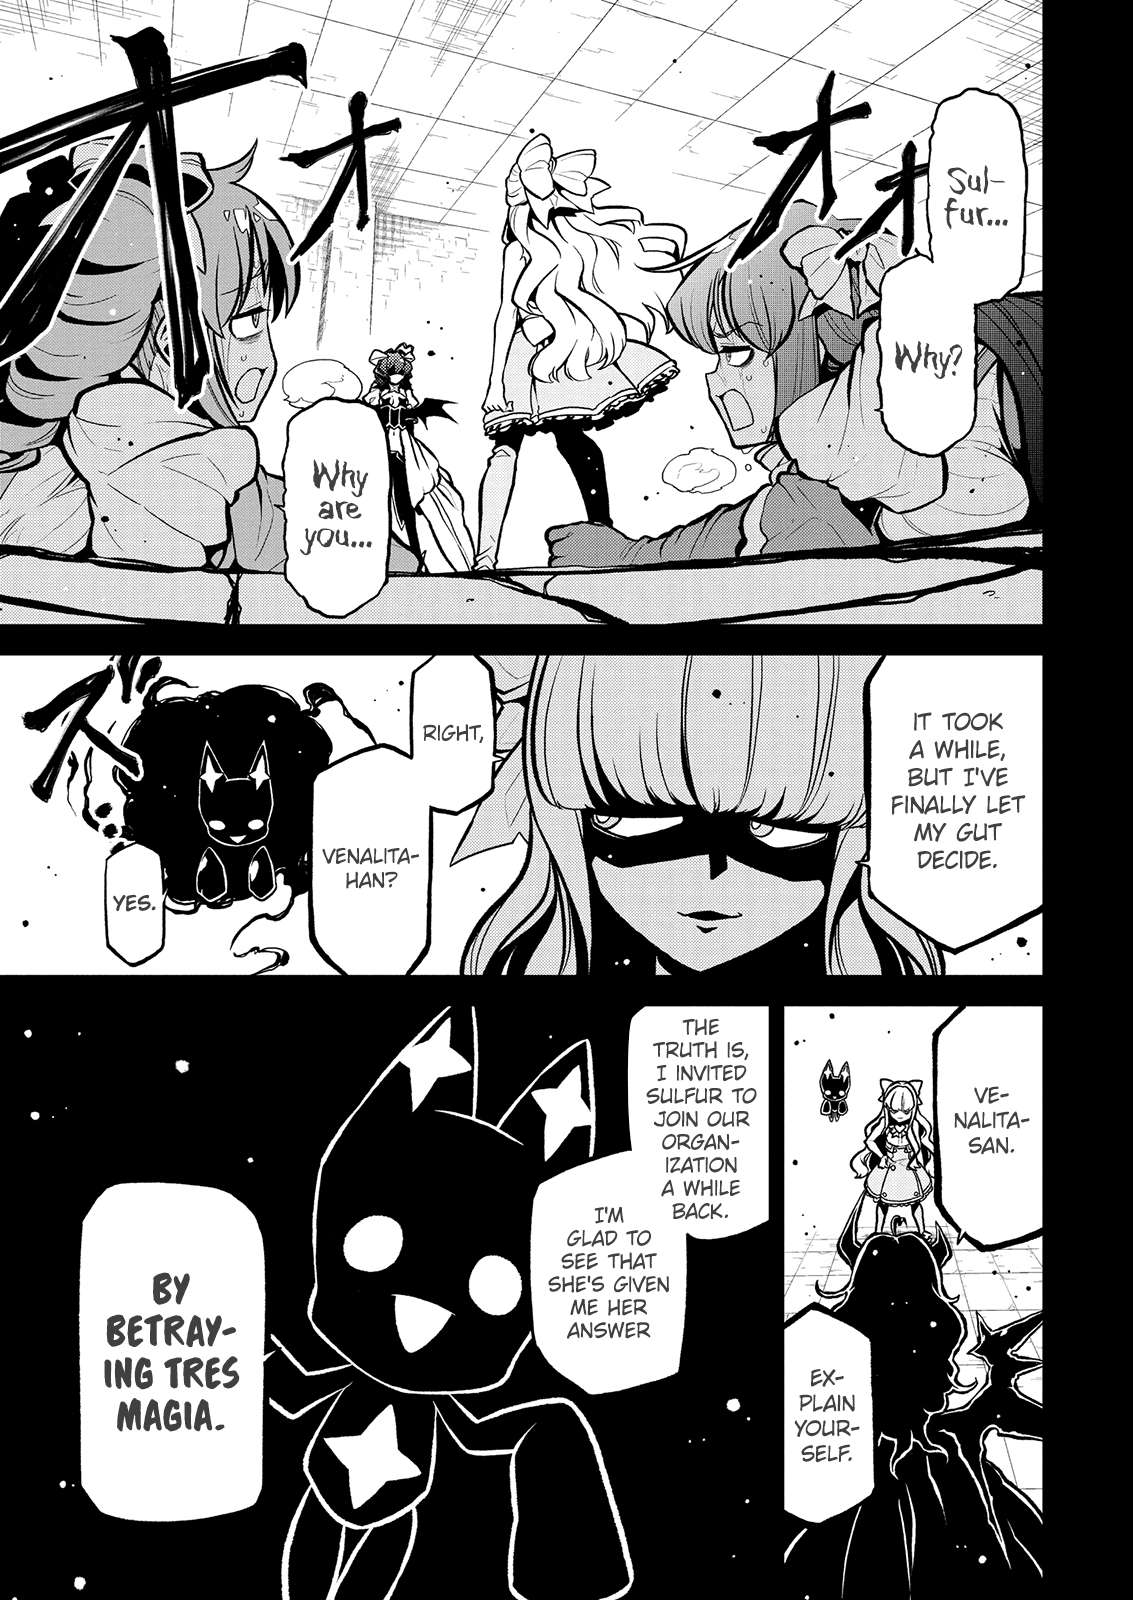 Gushing over Magical Girls - chapter 30 - #3